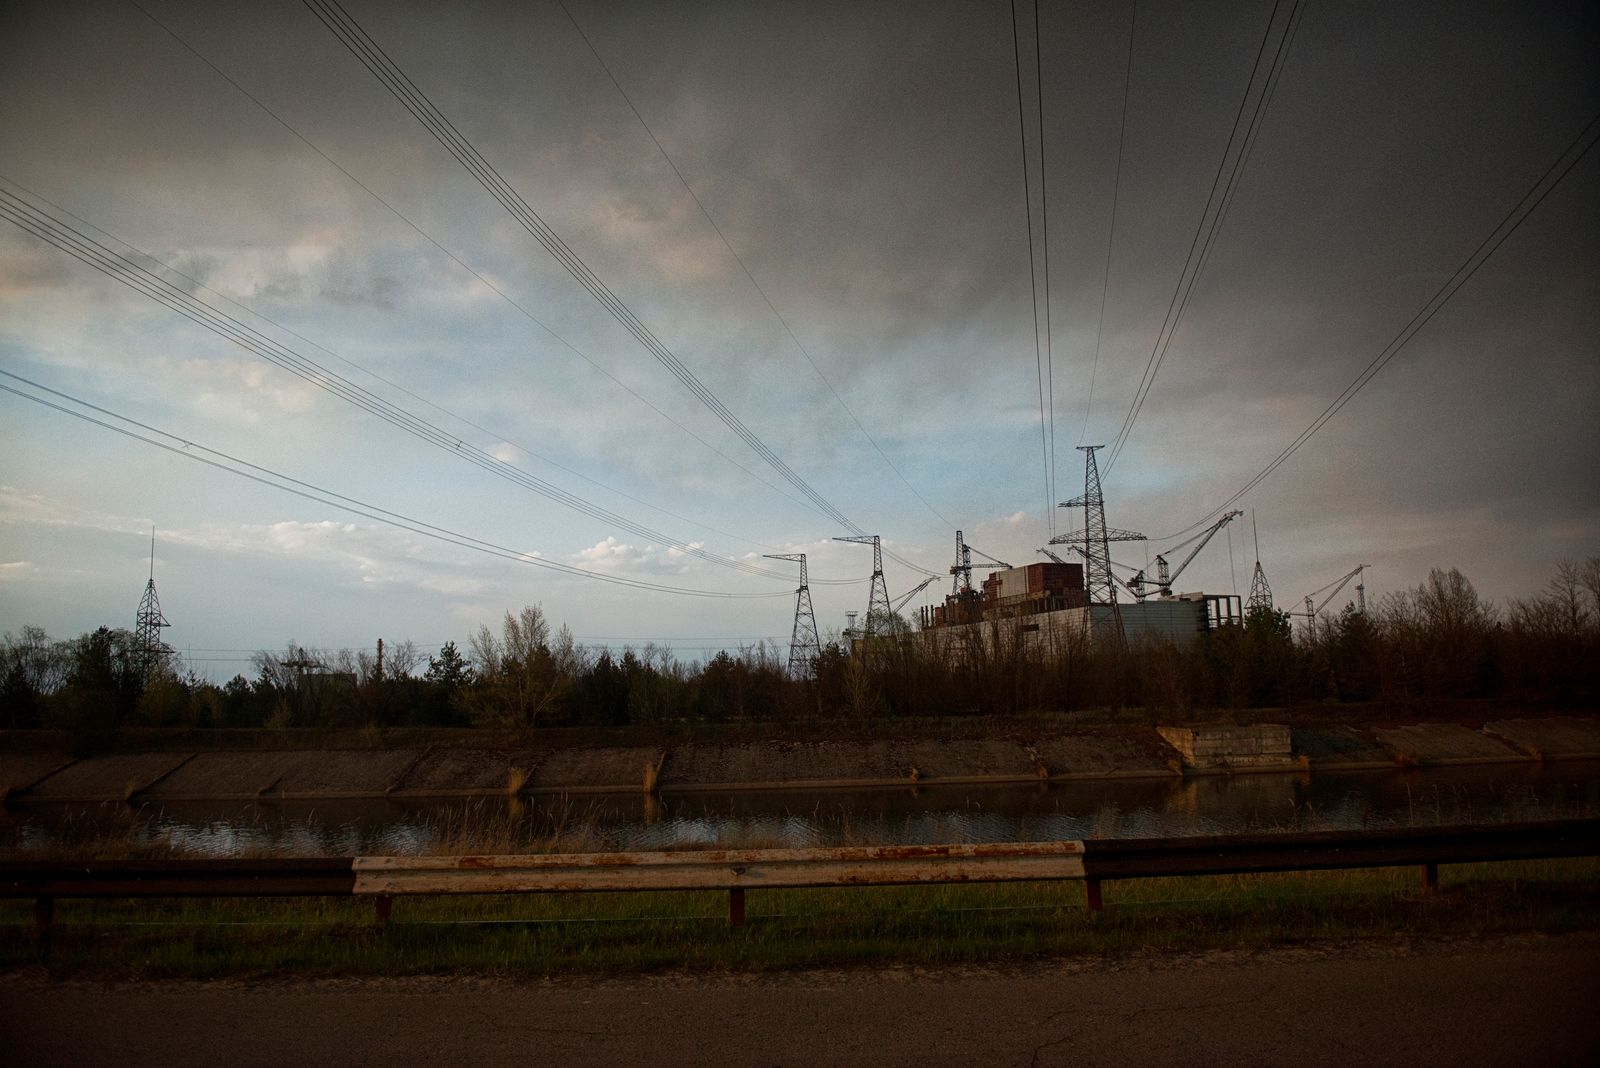 © Pierpaolo Mittica - Image from the The radioactive and rusty gold of Chernobyl photography project